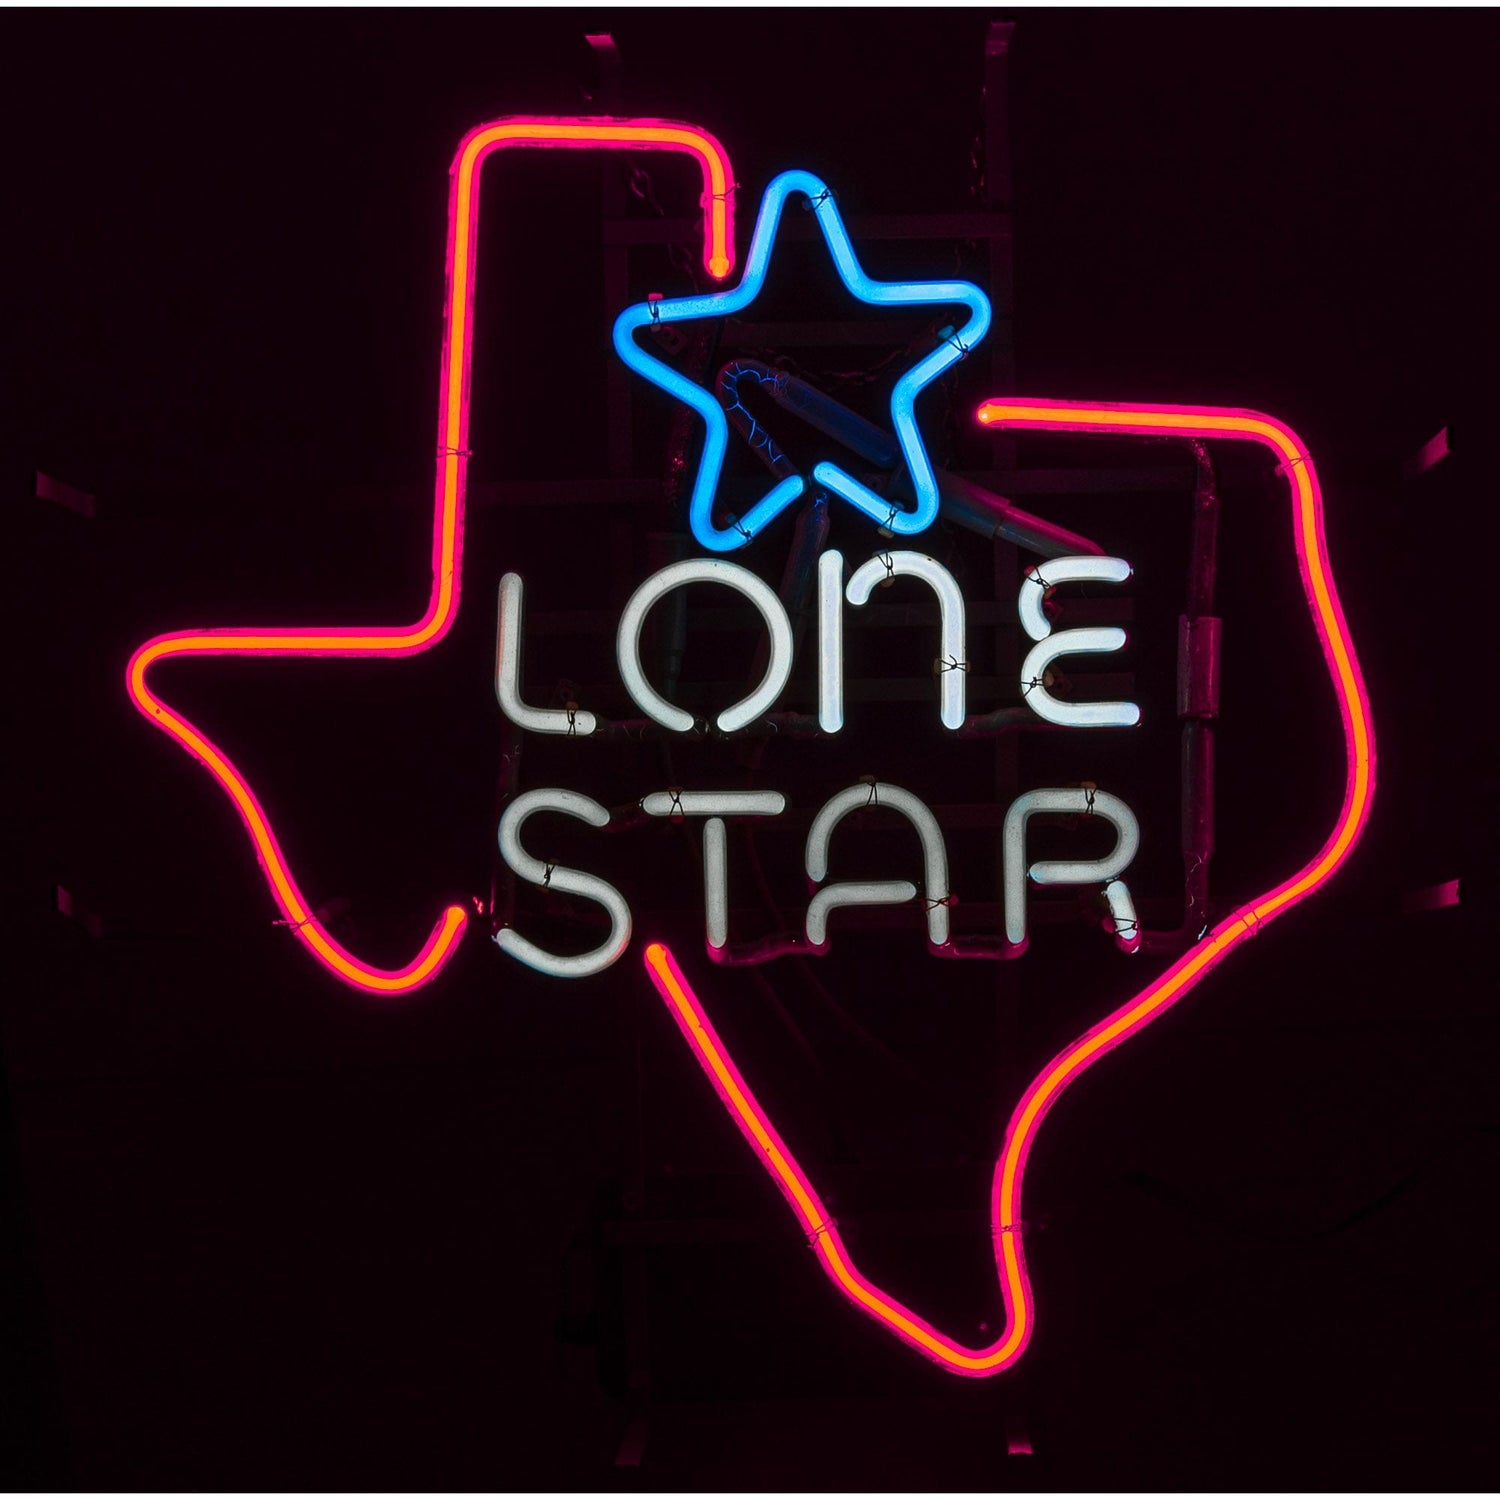 Texas Neon Sign "Lone Star" ZOOM